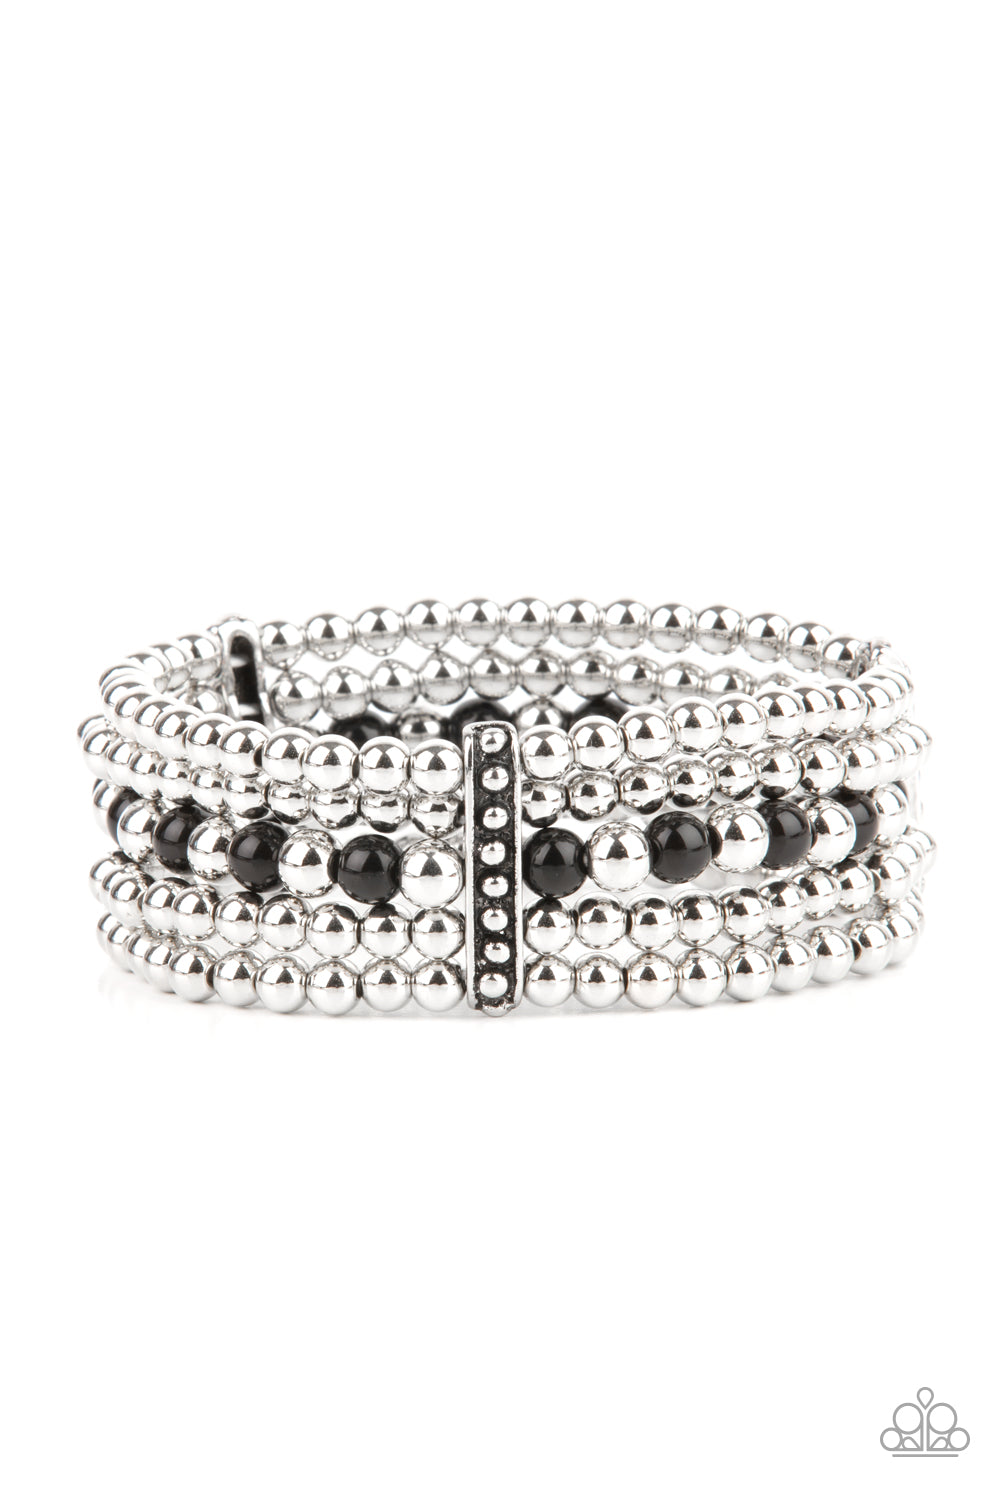 Paparazzi Gloss Over The Details - Black Bracelet - A Finishing Touch Jewelry